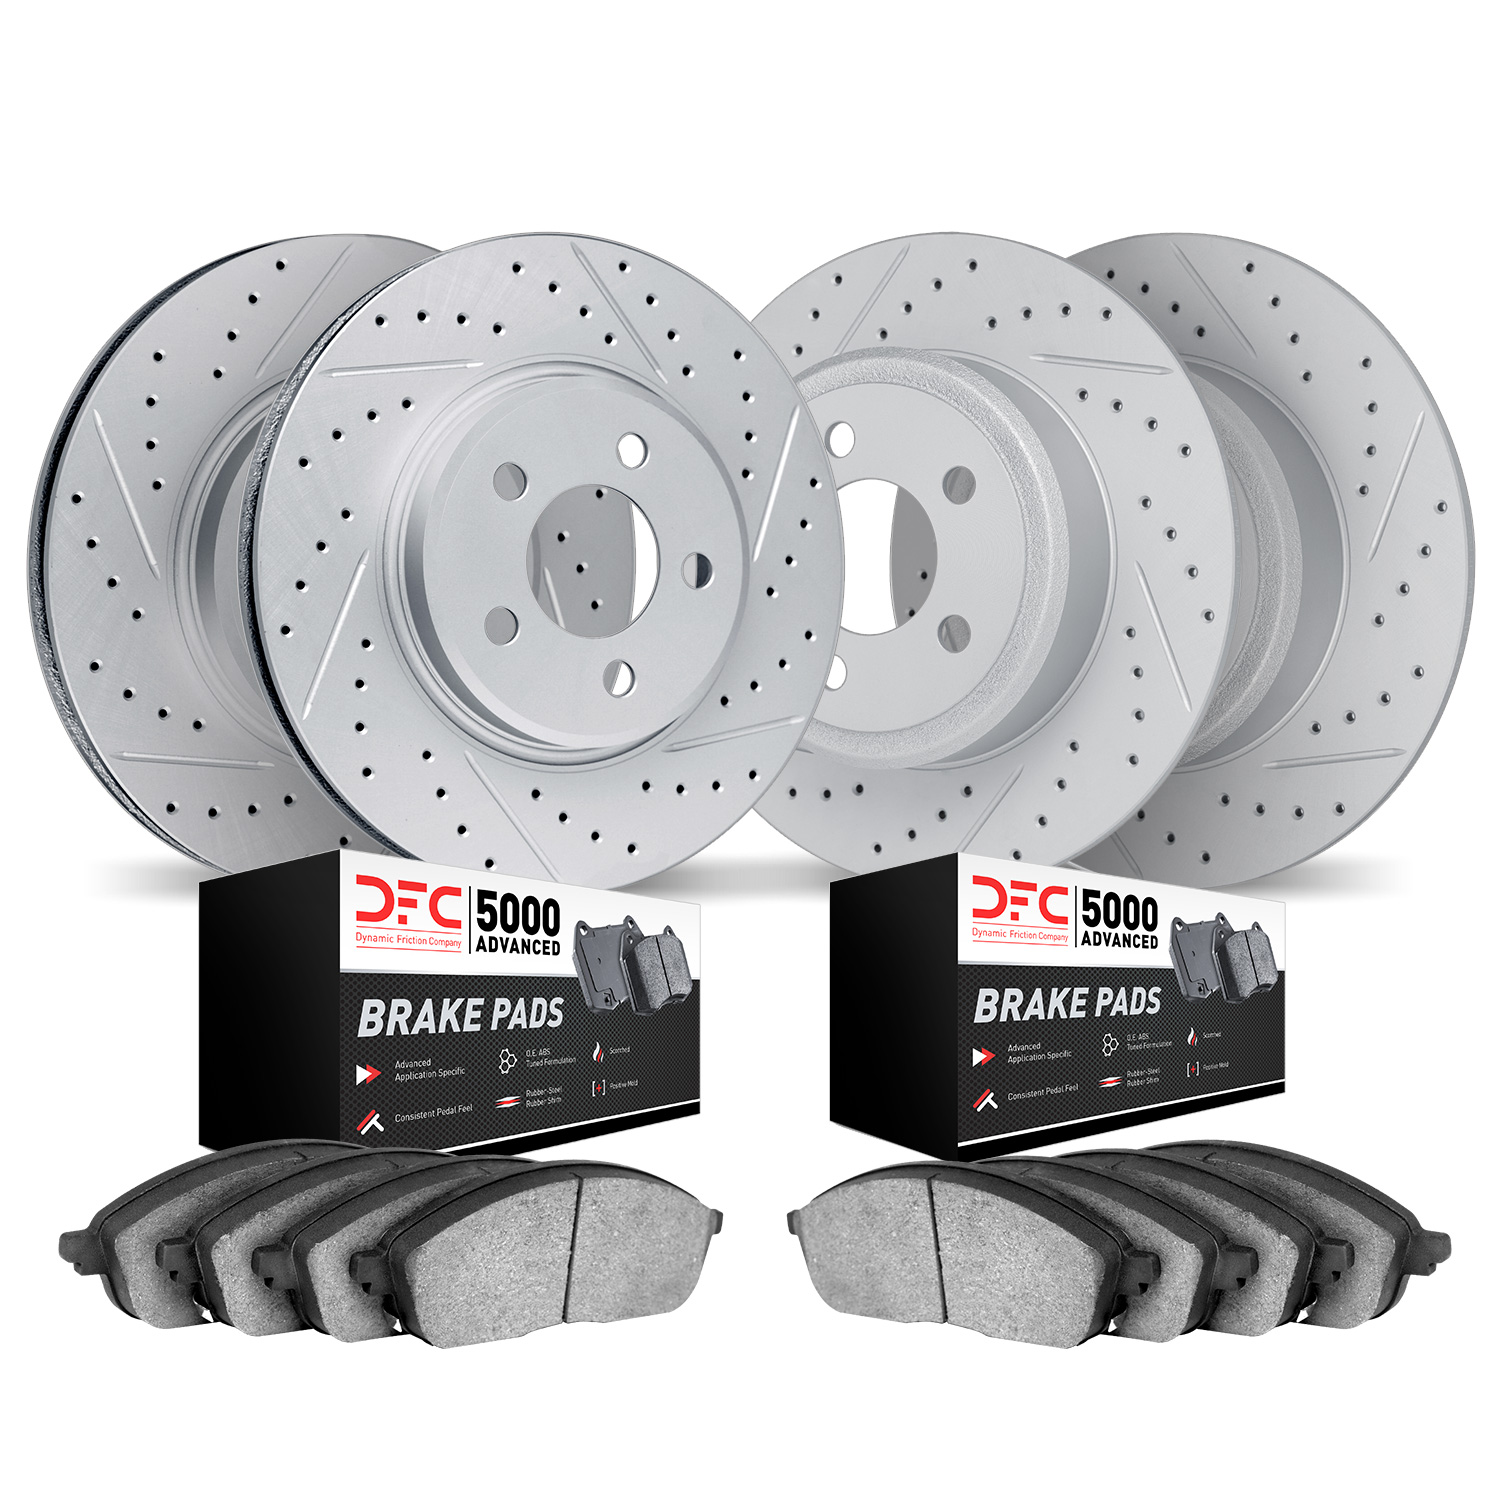 2504-76096 Geoperformance Drilled/Slotted Rotors w/5000 Advanced Brake Pads Kit, 2000-2005 Lexus/Toyota/Scion, Position: Front a